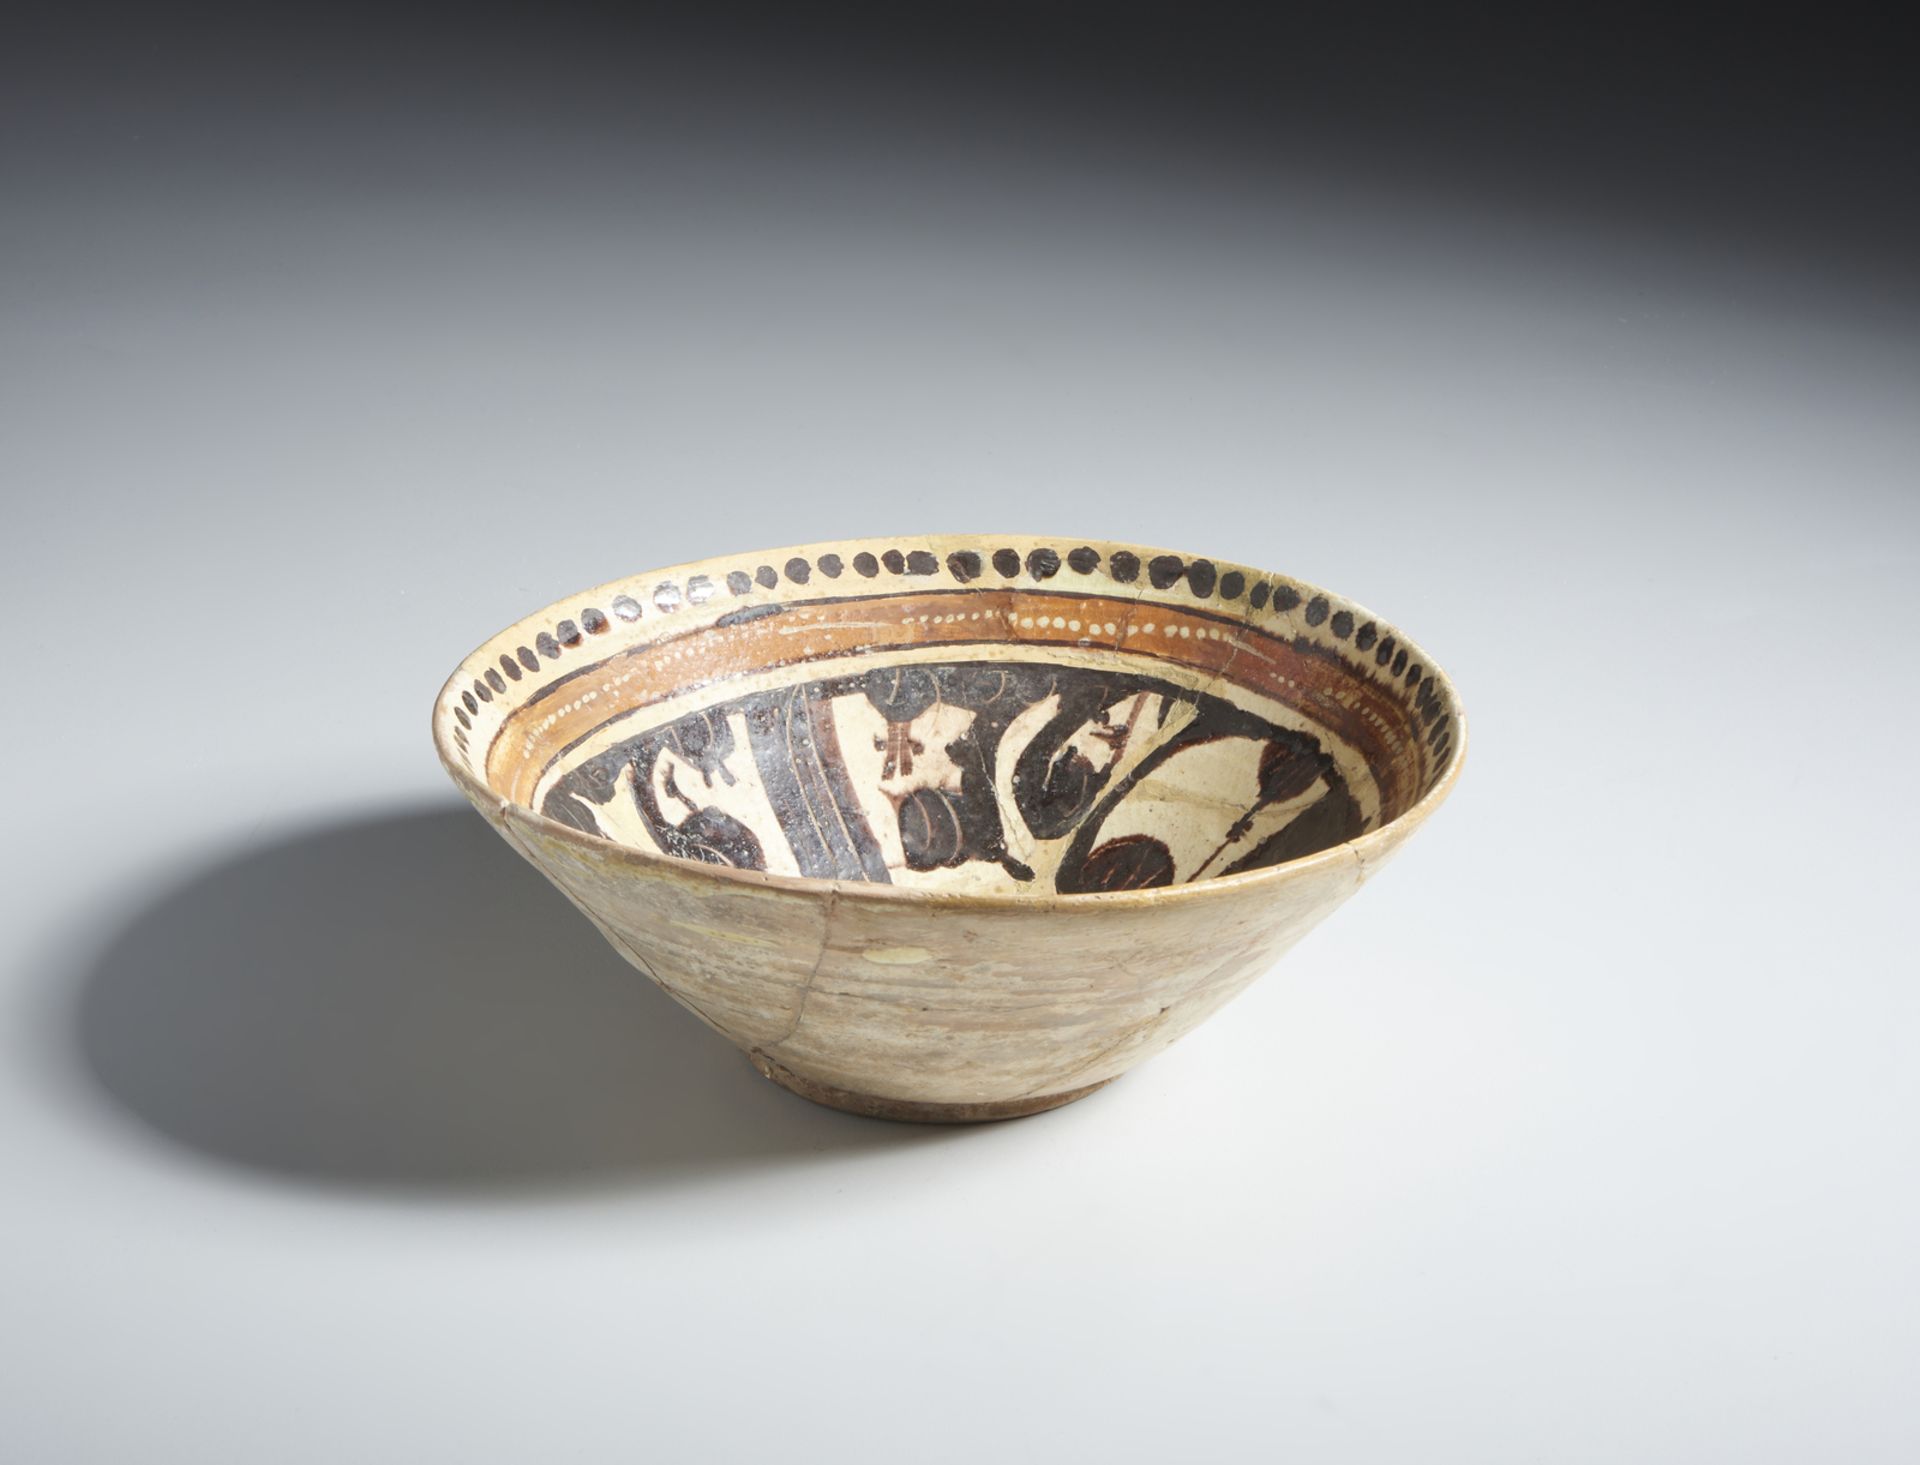 A terracotta slip painted calligraphic bowl Samanid Eastern Persia, 10th century Restored. Cm 22,